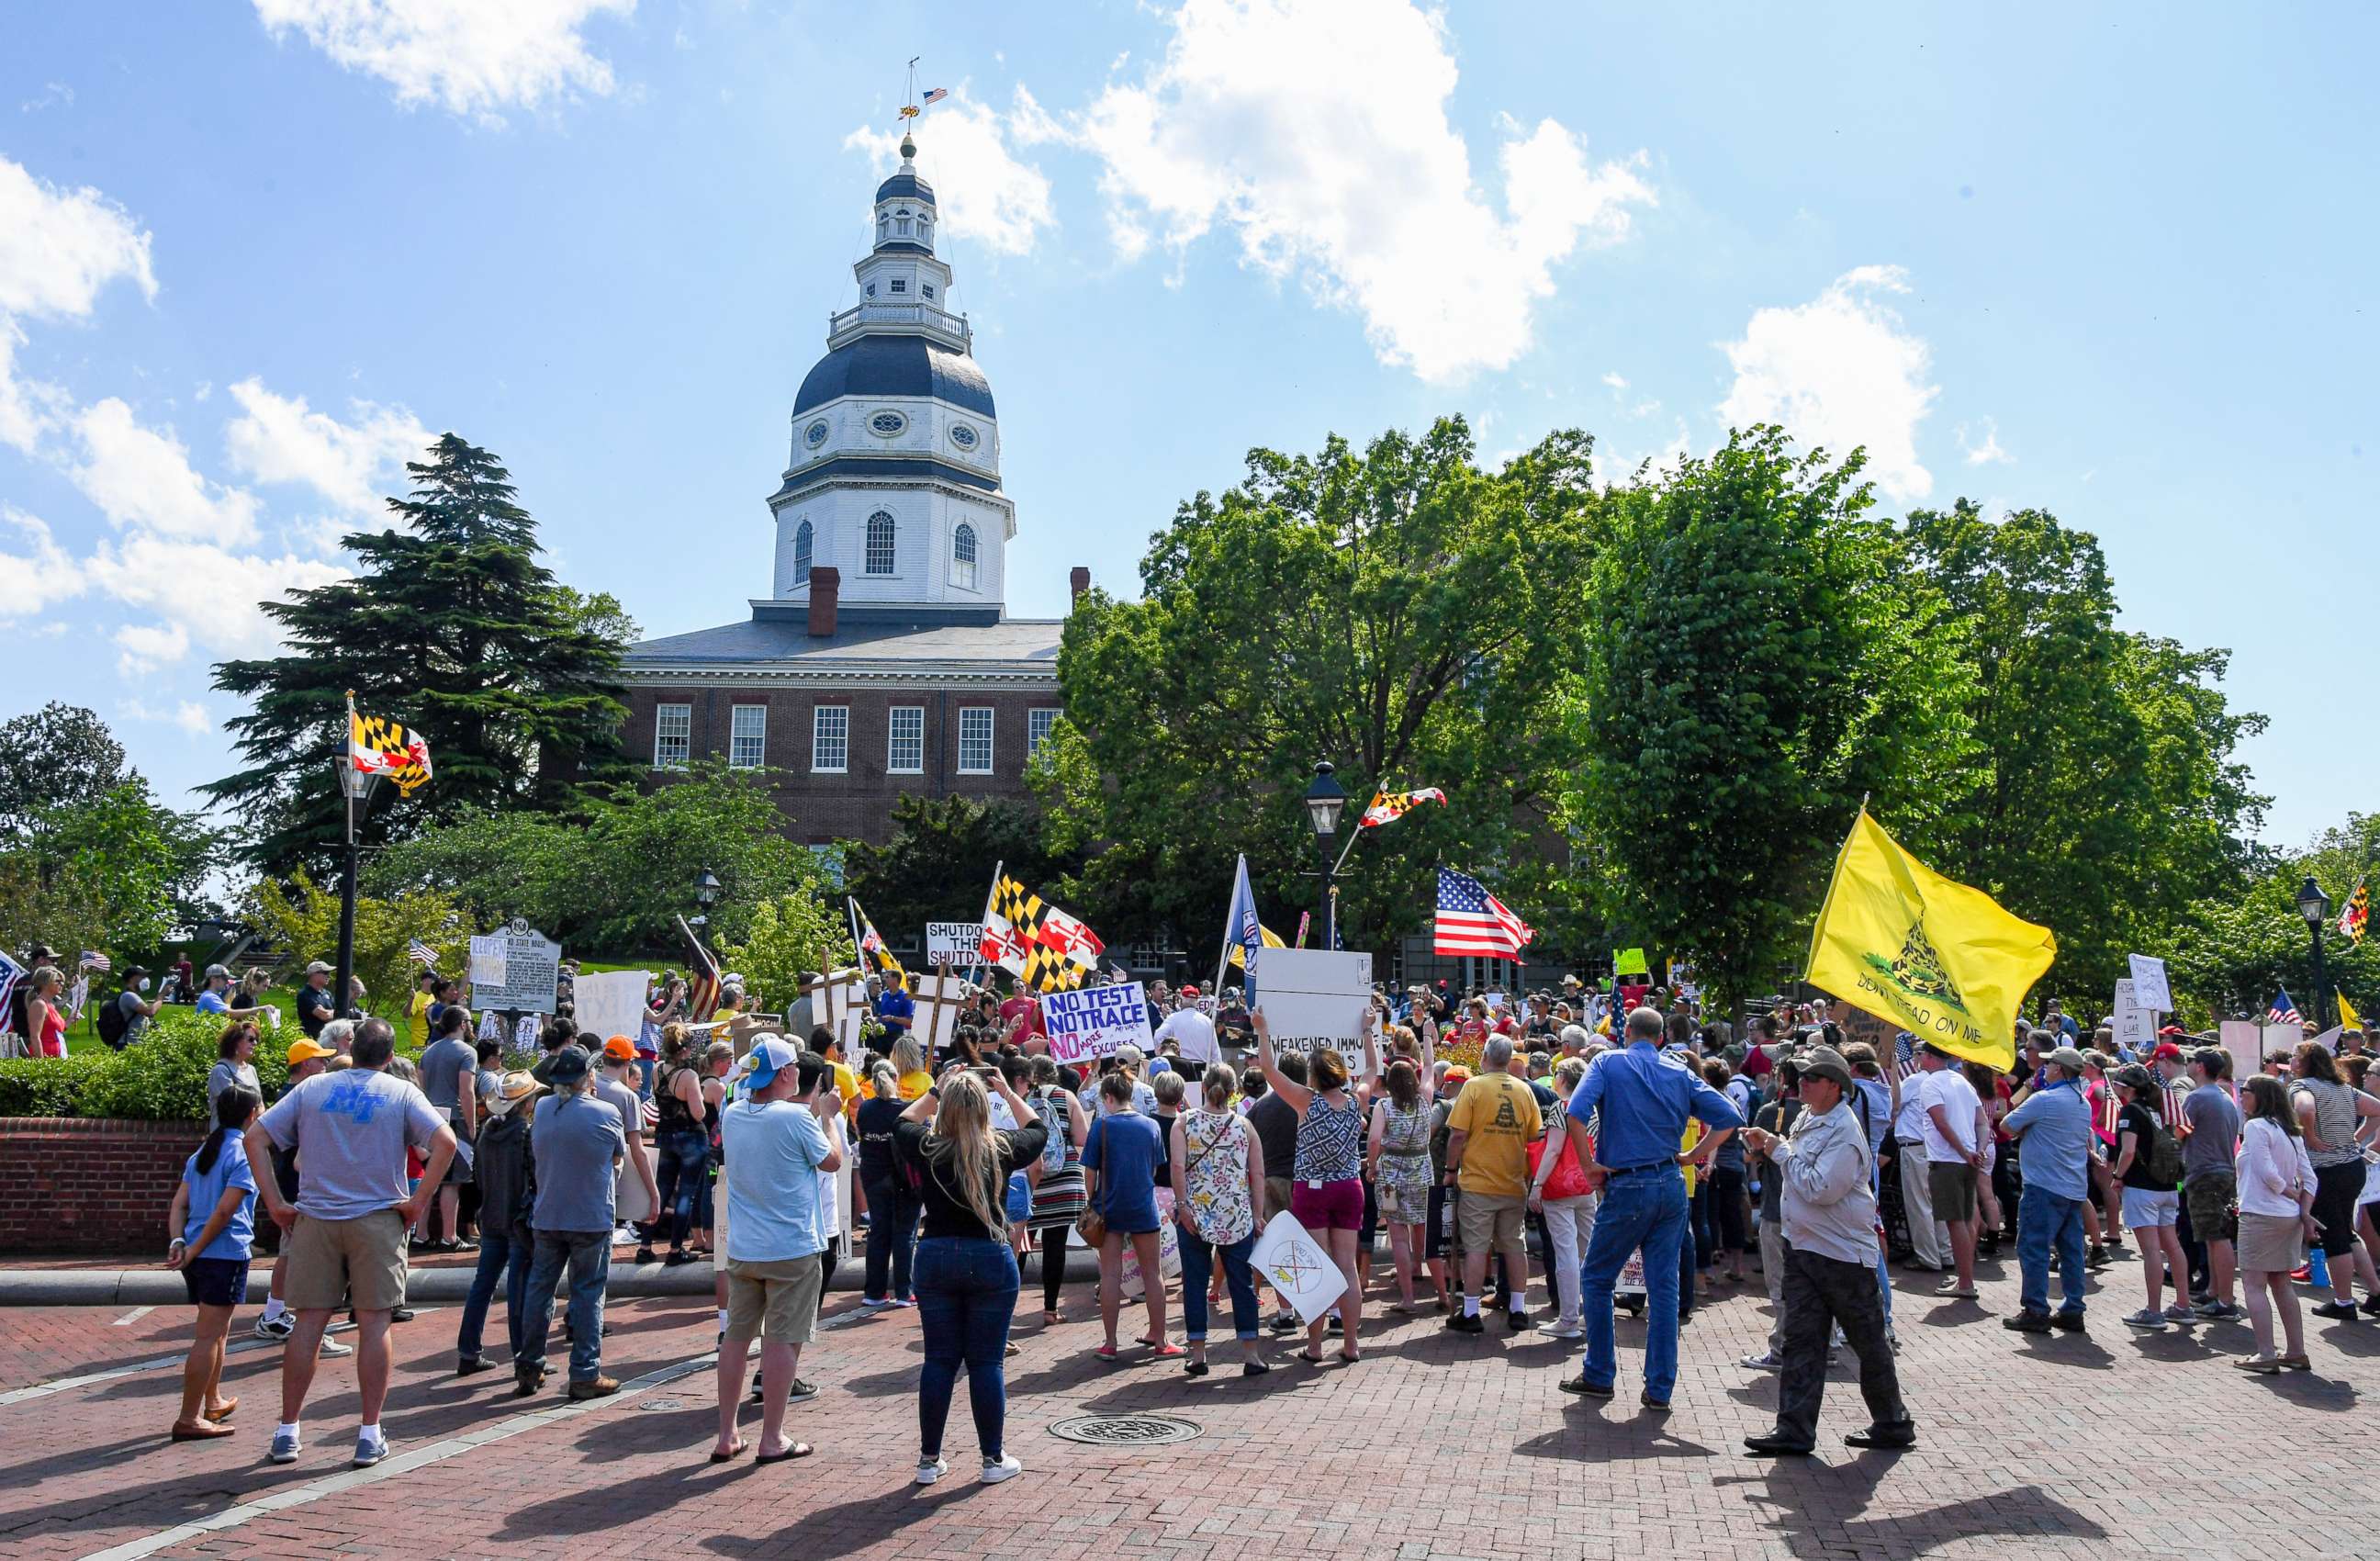 PHOTO: A group called "Reopen Maryland" gather to protest the restrictions imposed by Maryland Governor Larry Hogan to combat the spread of the novel coronavirus.